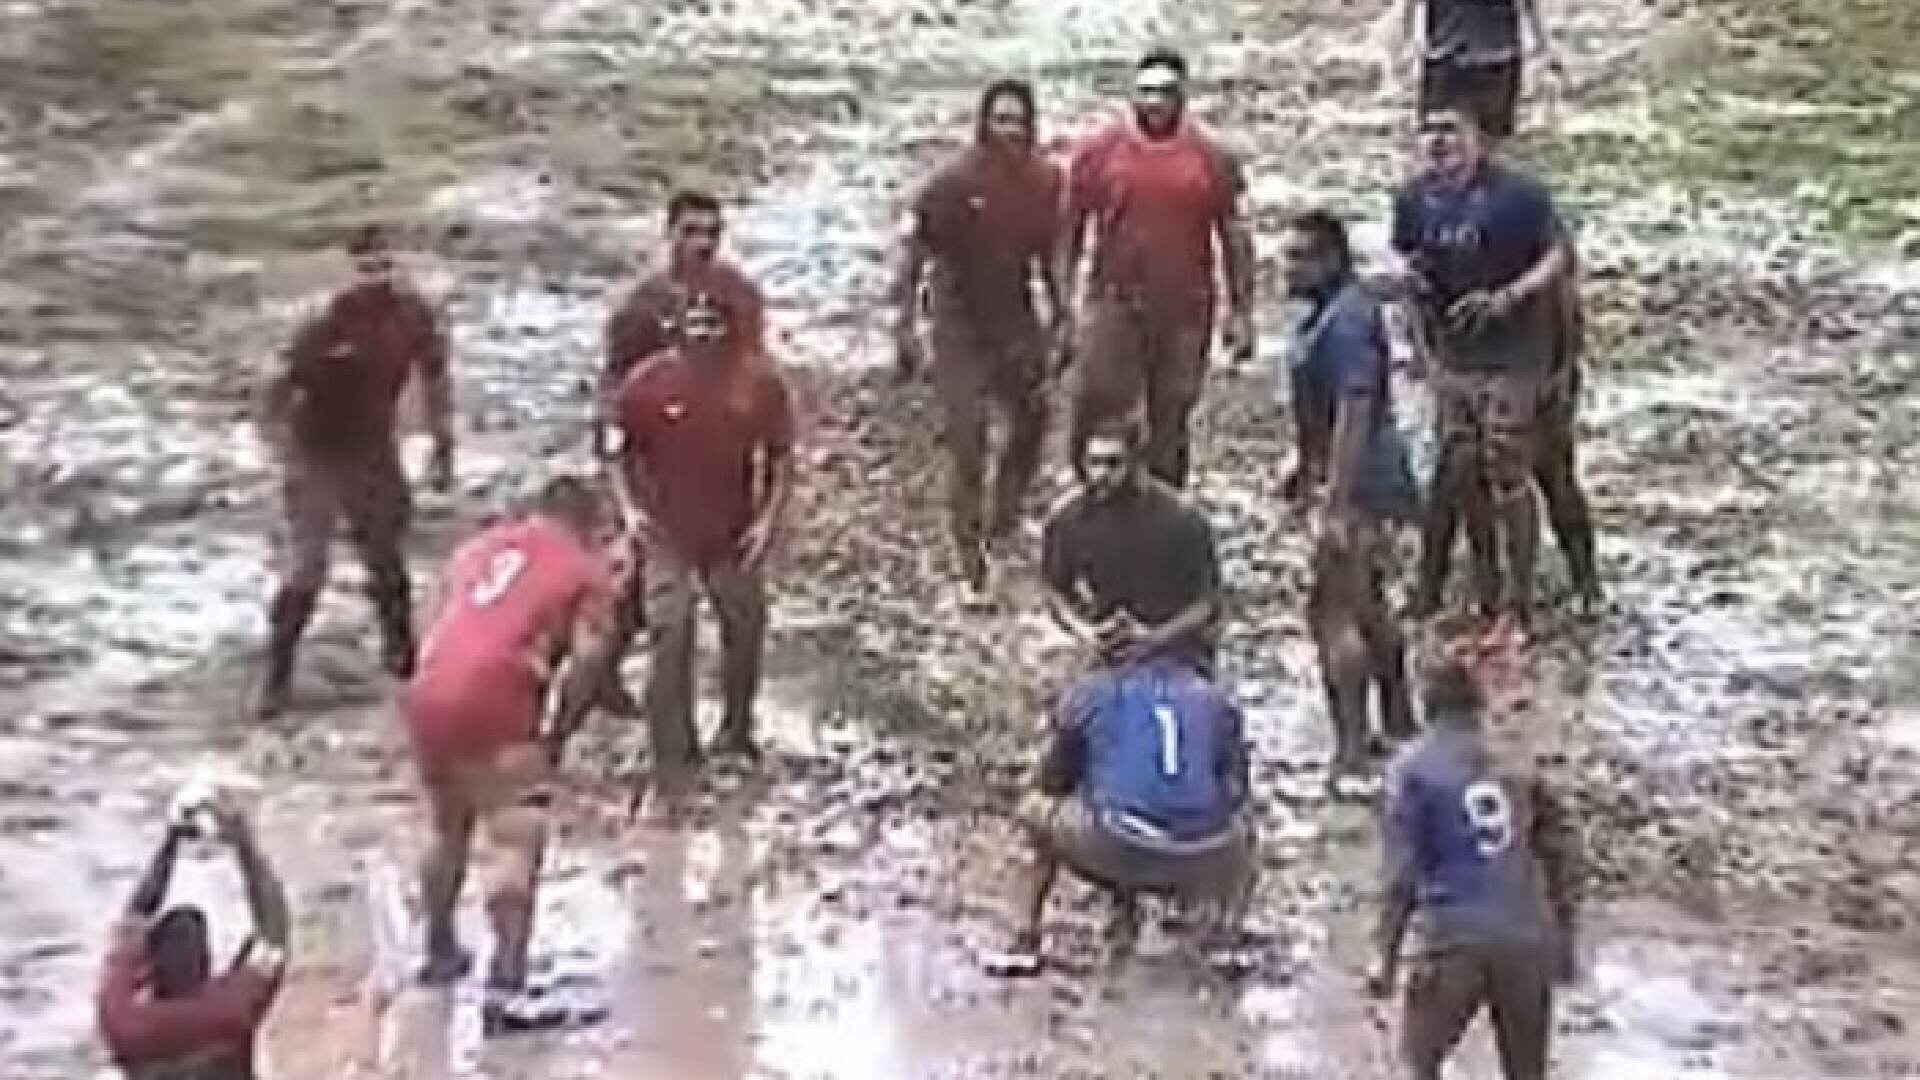 Samoa and Tonga had the option of playing last week's game elsewhere - but turned it down